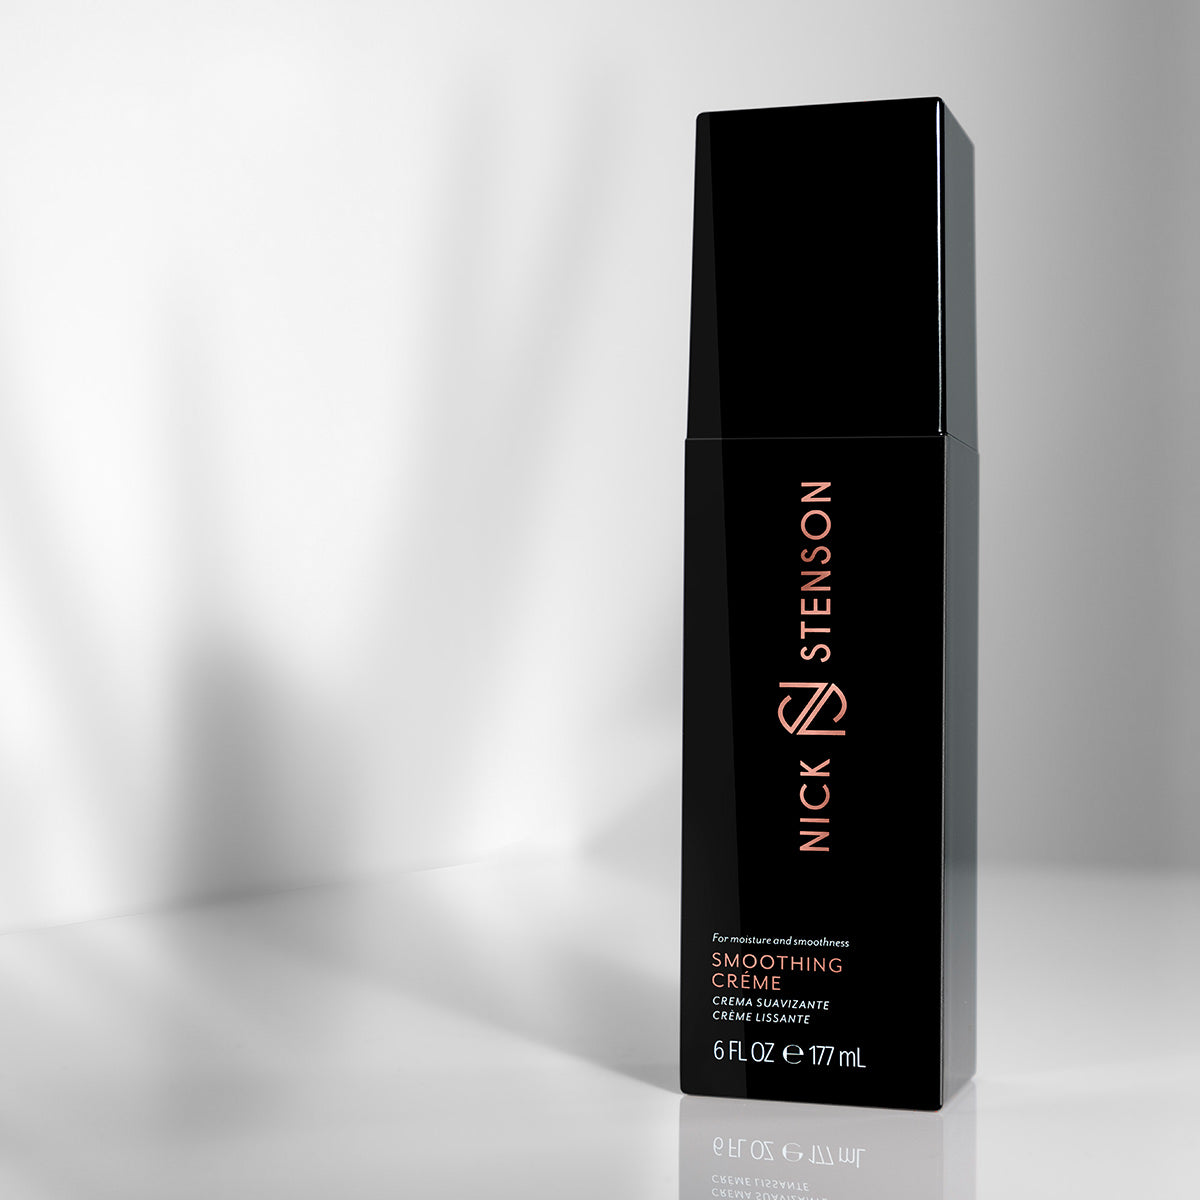 Texture Spray – Nick Stenson Beauty  Consciously Curated, Naturally Luxe  Haircare